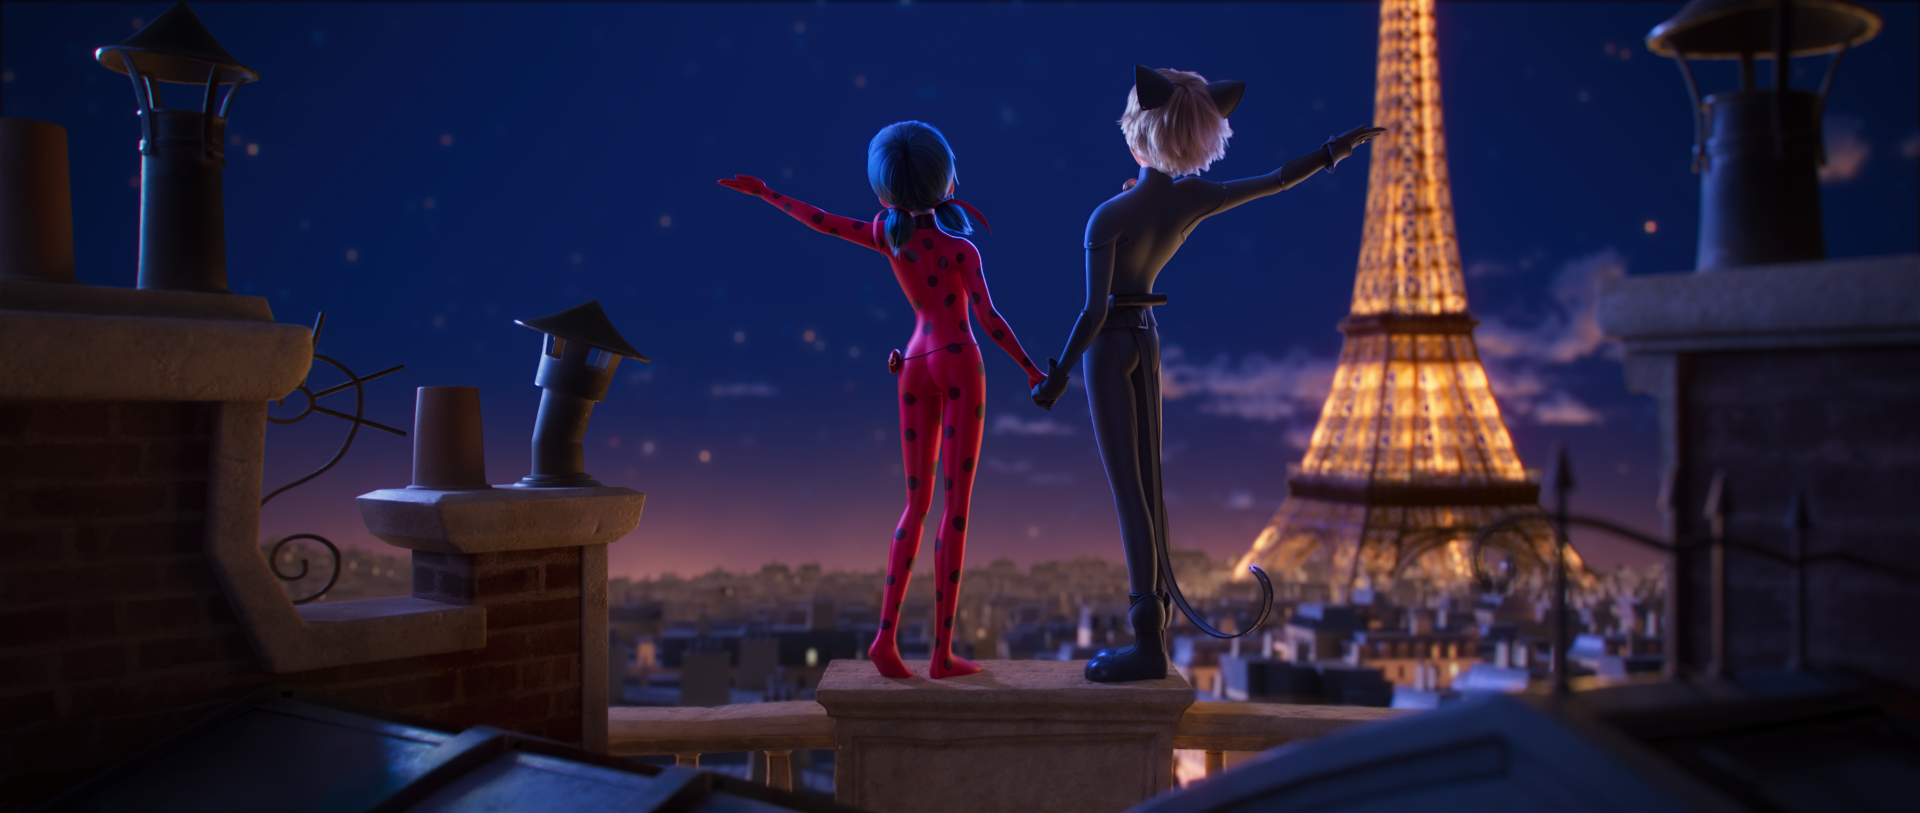 THE SUCCESS OF MIRACULOUS LADYBUG IN MEXICO